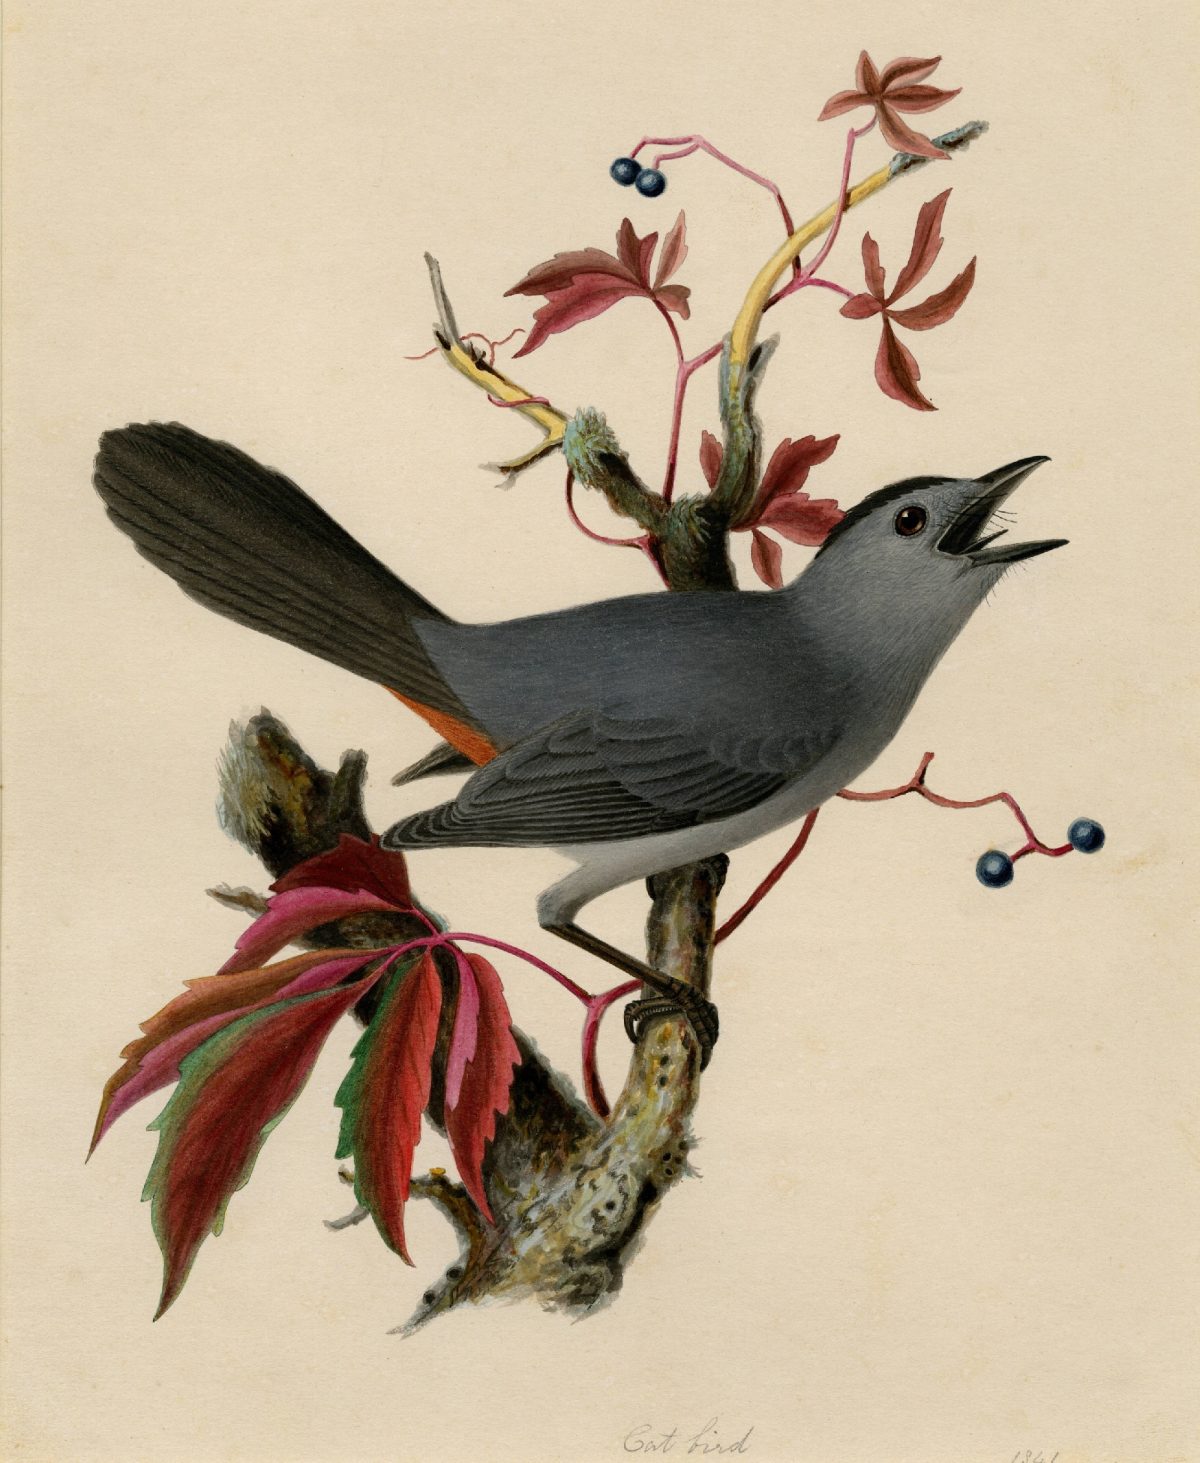 Cat Bird"A single bird is depicted perched on a branch. Virginia creeper in fall color is twisted around the branch"